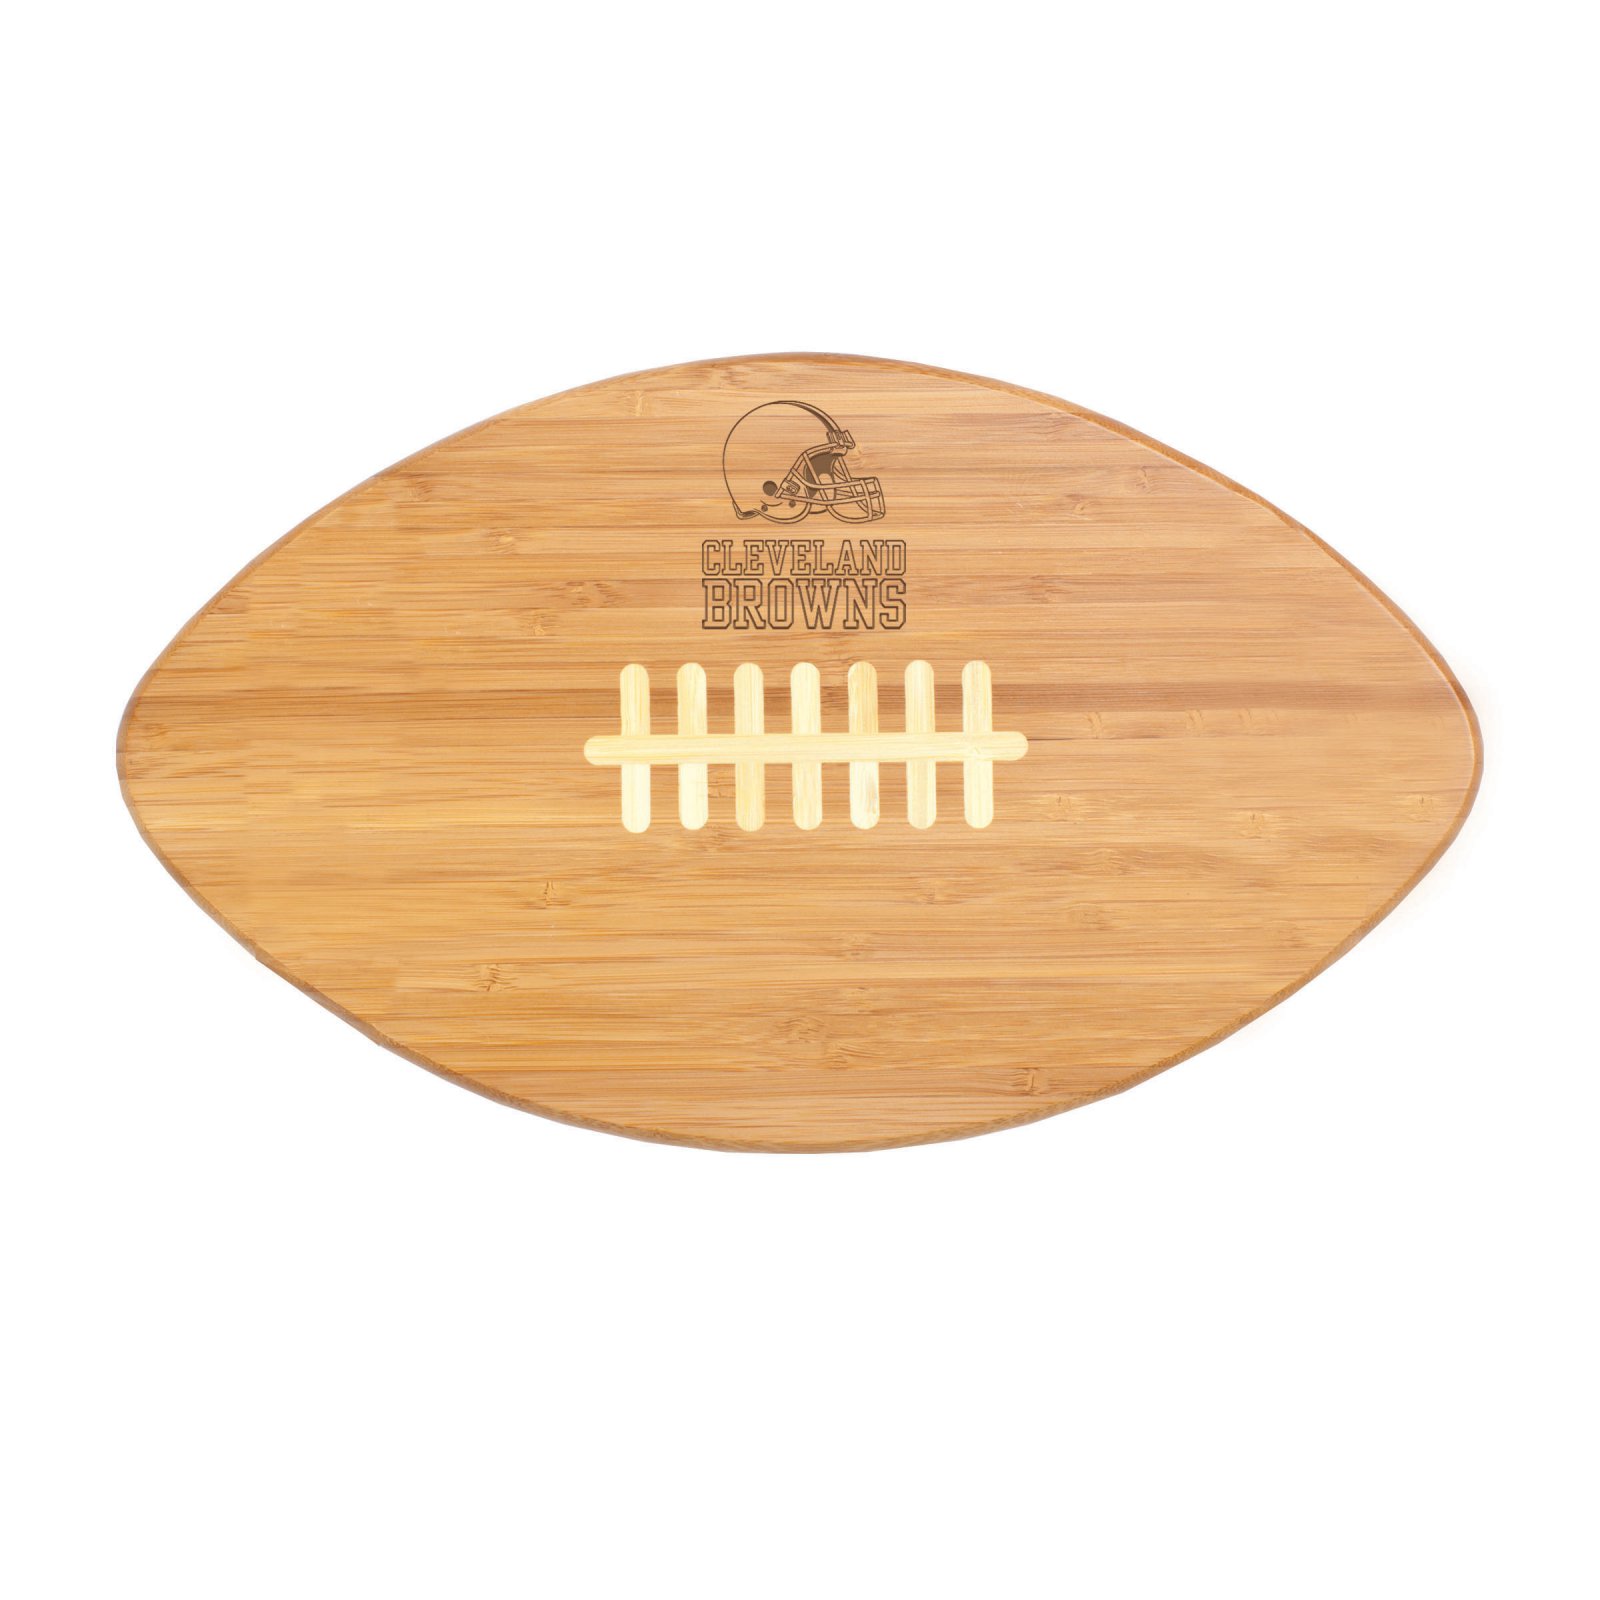 New York Jets Football Cutting Board - image 5 of 5